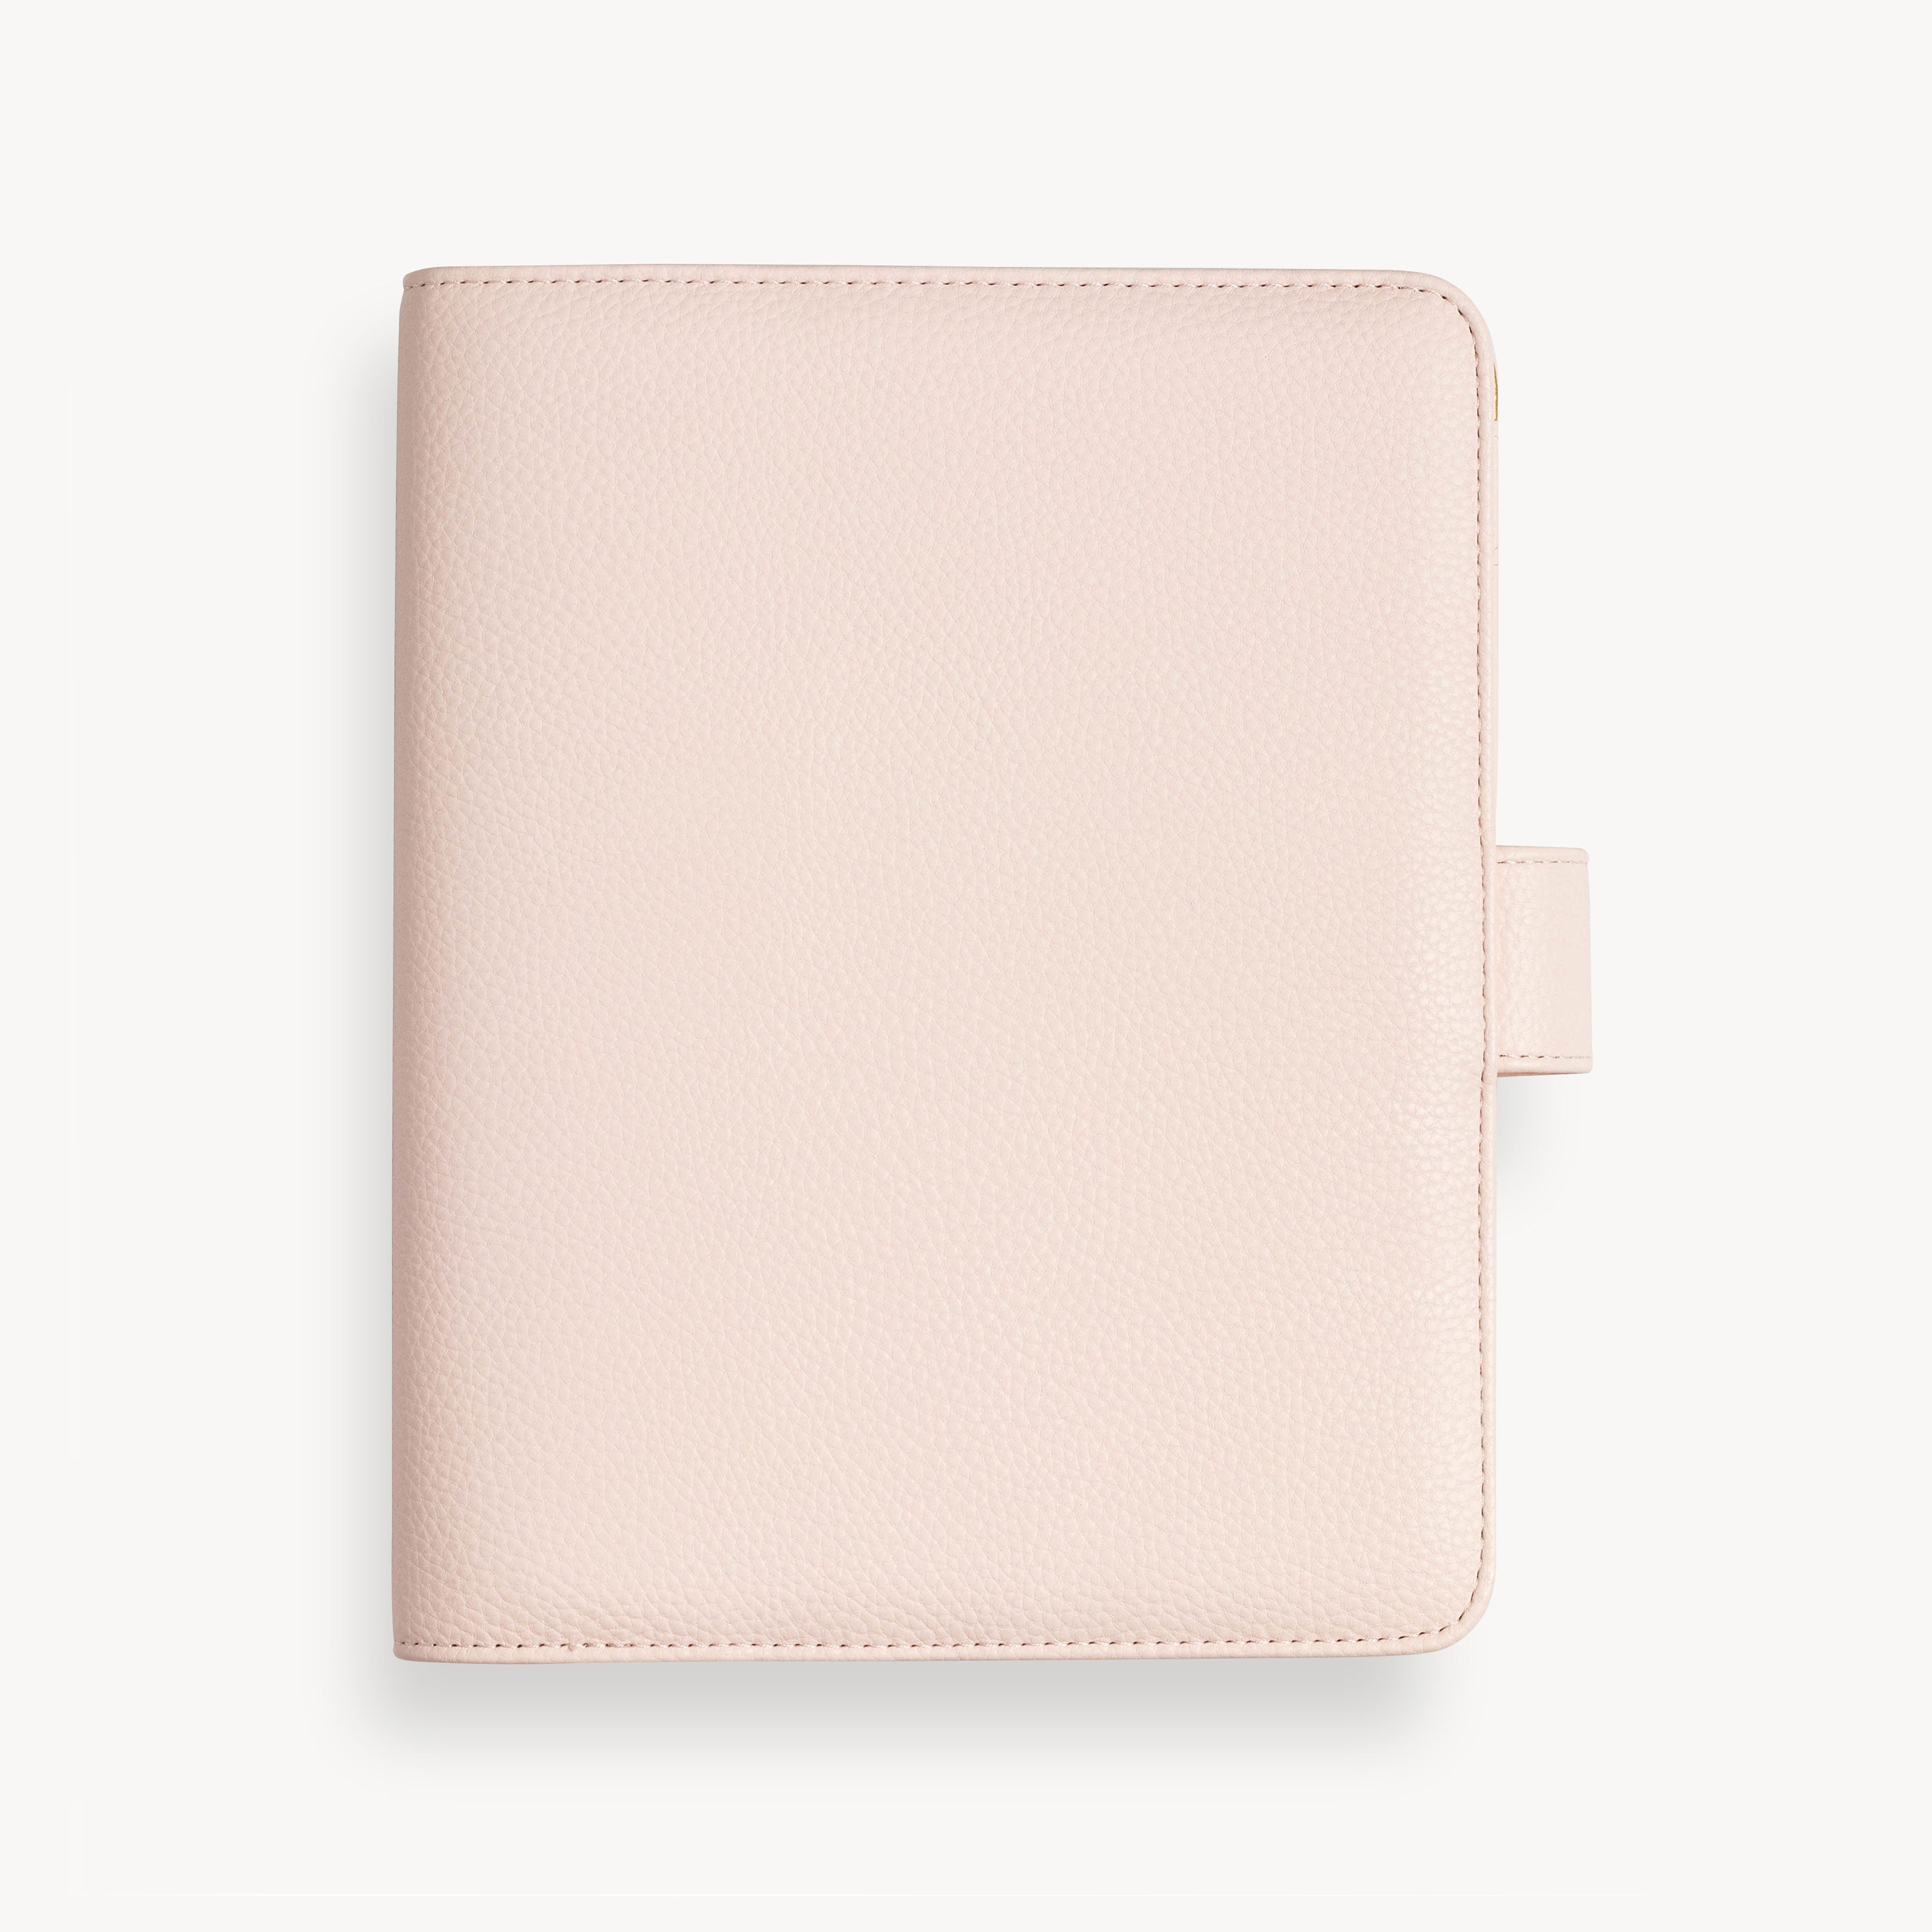 A5 Leather Binder: Blush | Refillable Planners | Day Designer